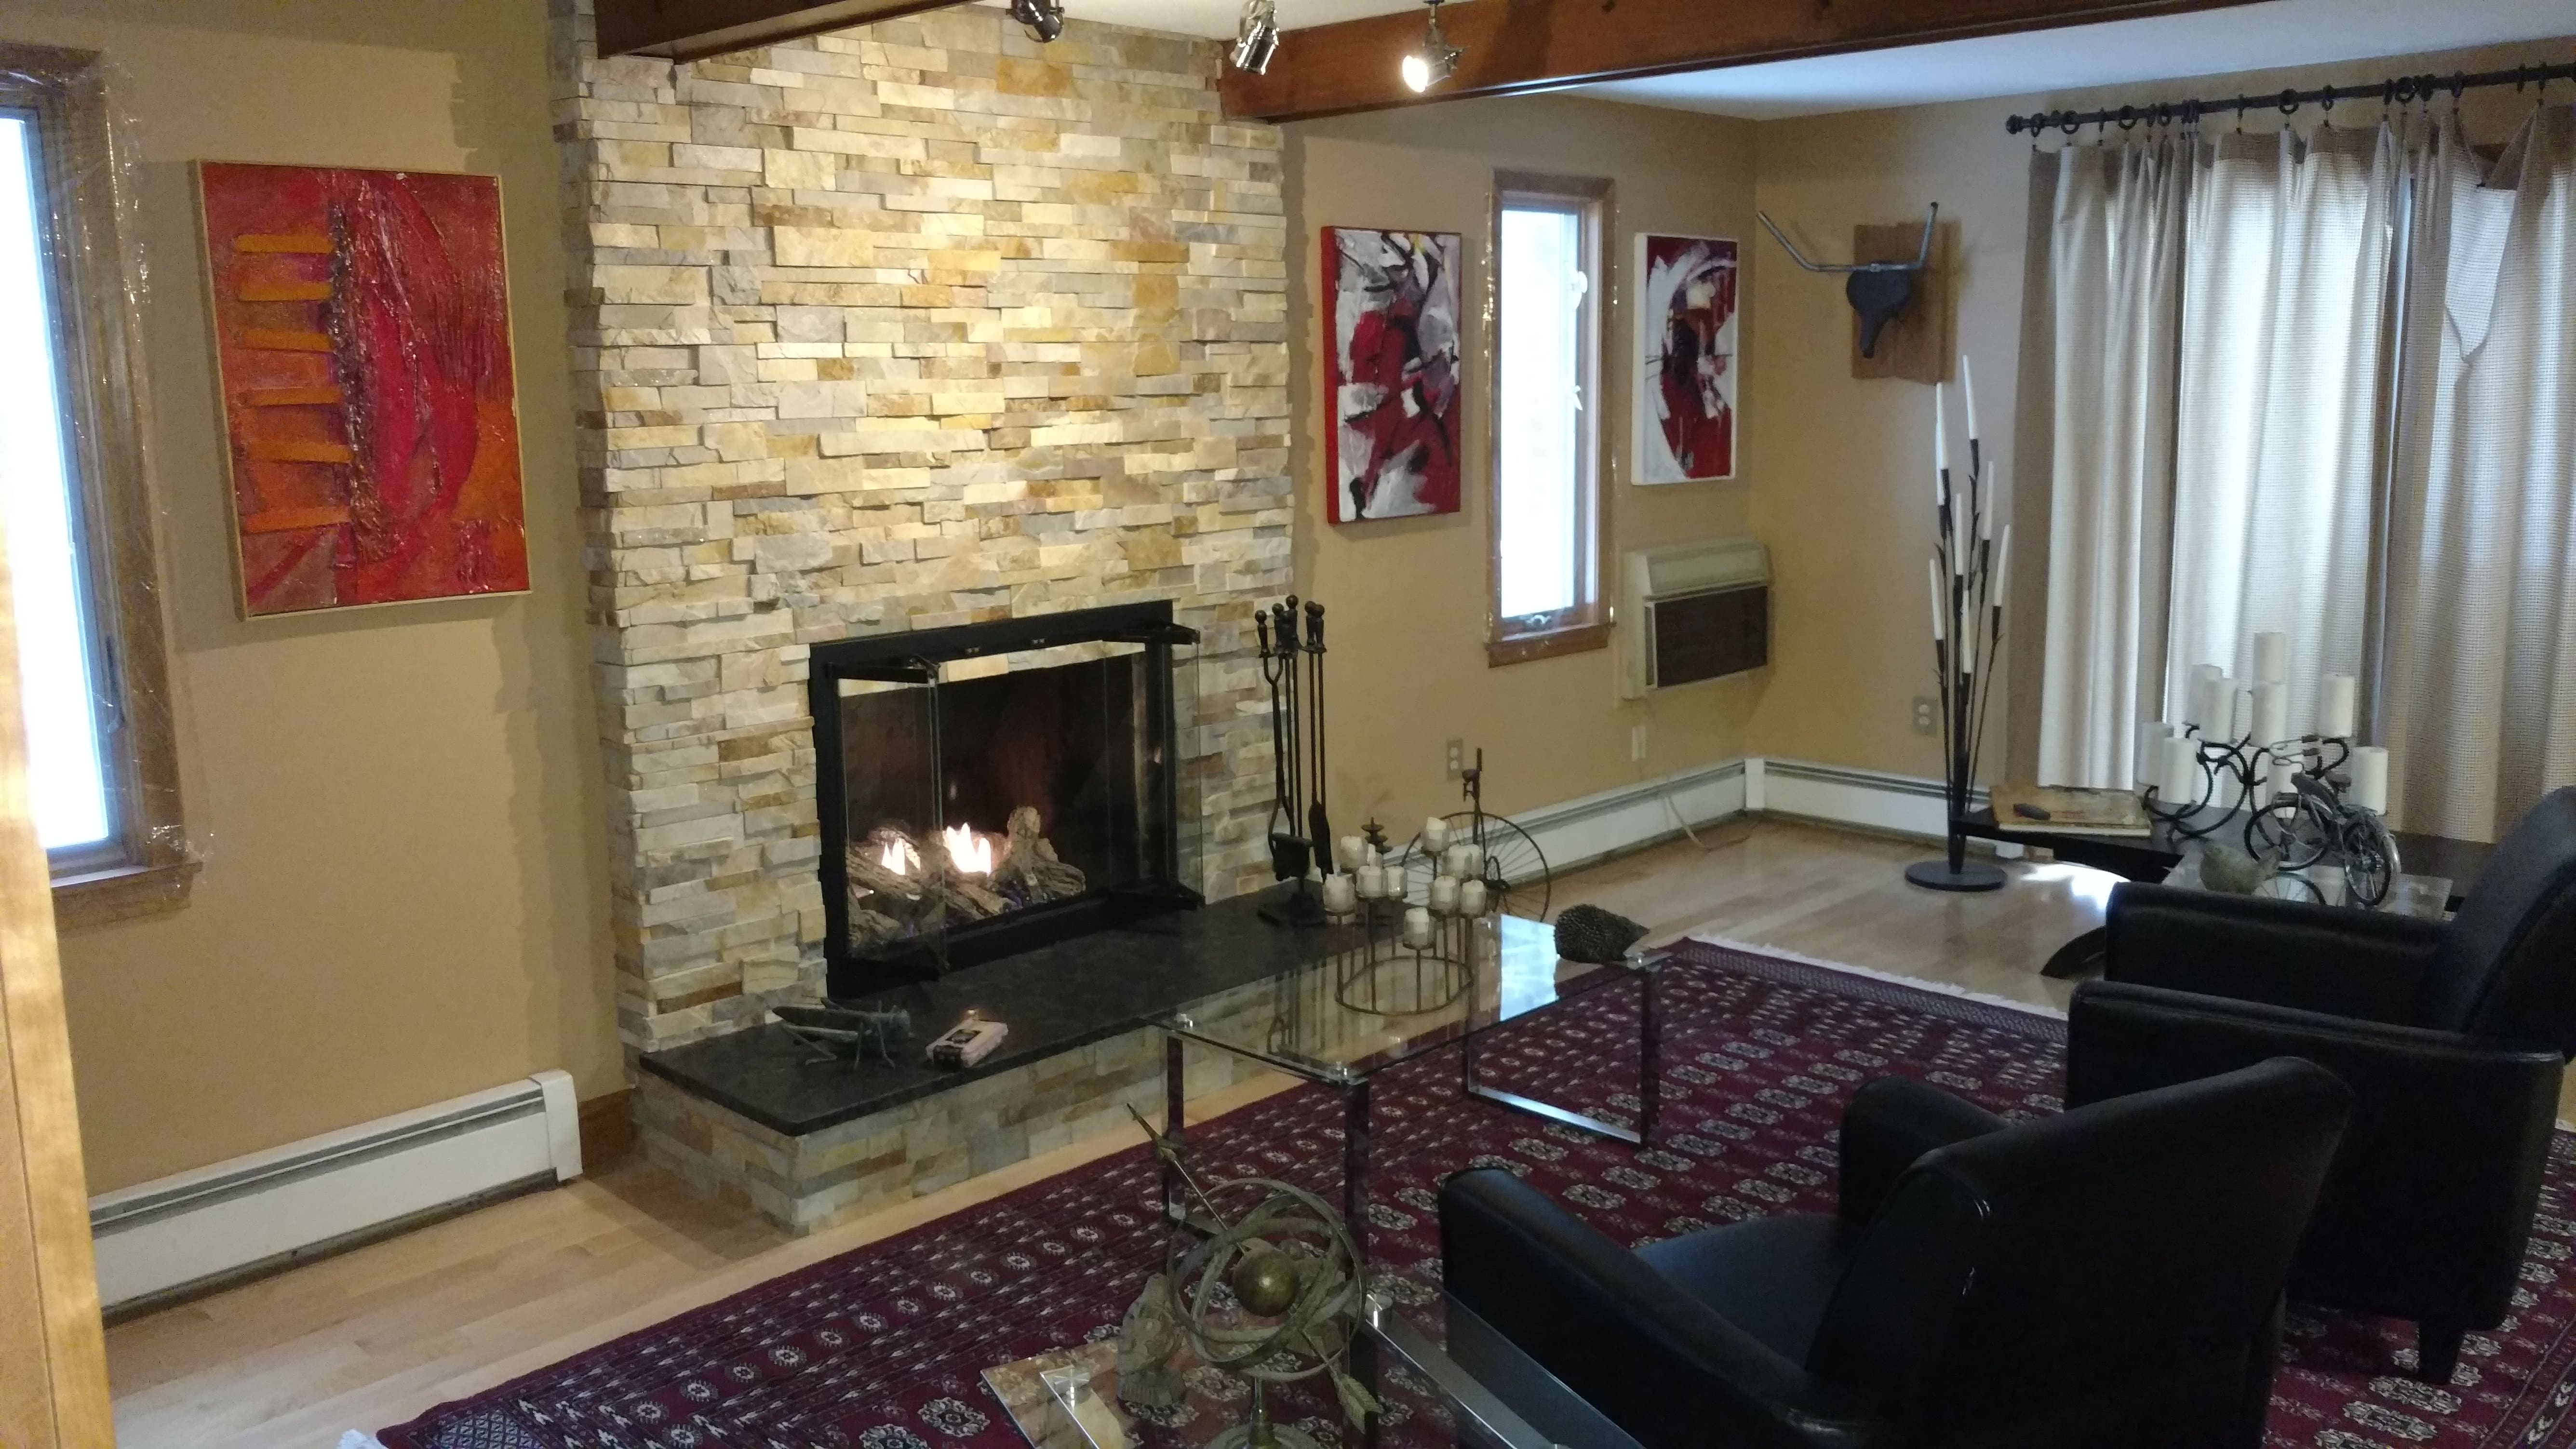 Norstone Aztec XL Stone Veneer Fireplace Remodel Project with new granite hearth stone